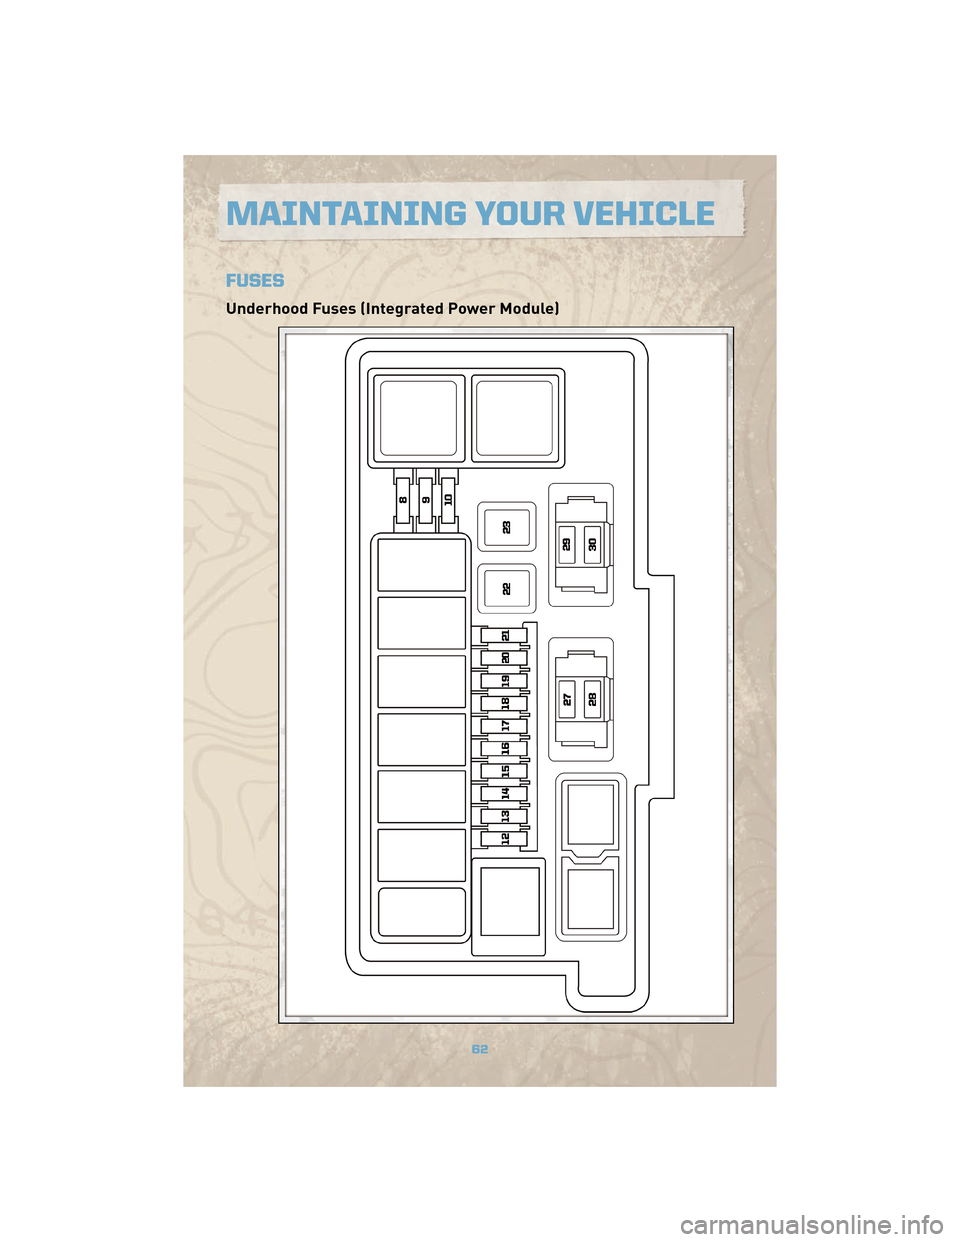 JEEP COMMANDER 2010 1.G Repair Manual FUSES
Underhood Fuses (Integrated Power Module)
MAINTAINING YOUR VEHICLE
62 